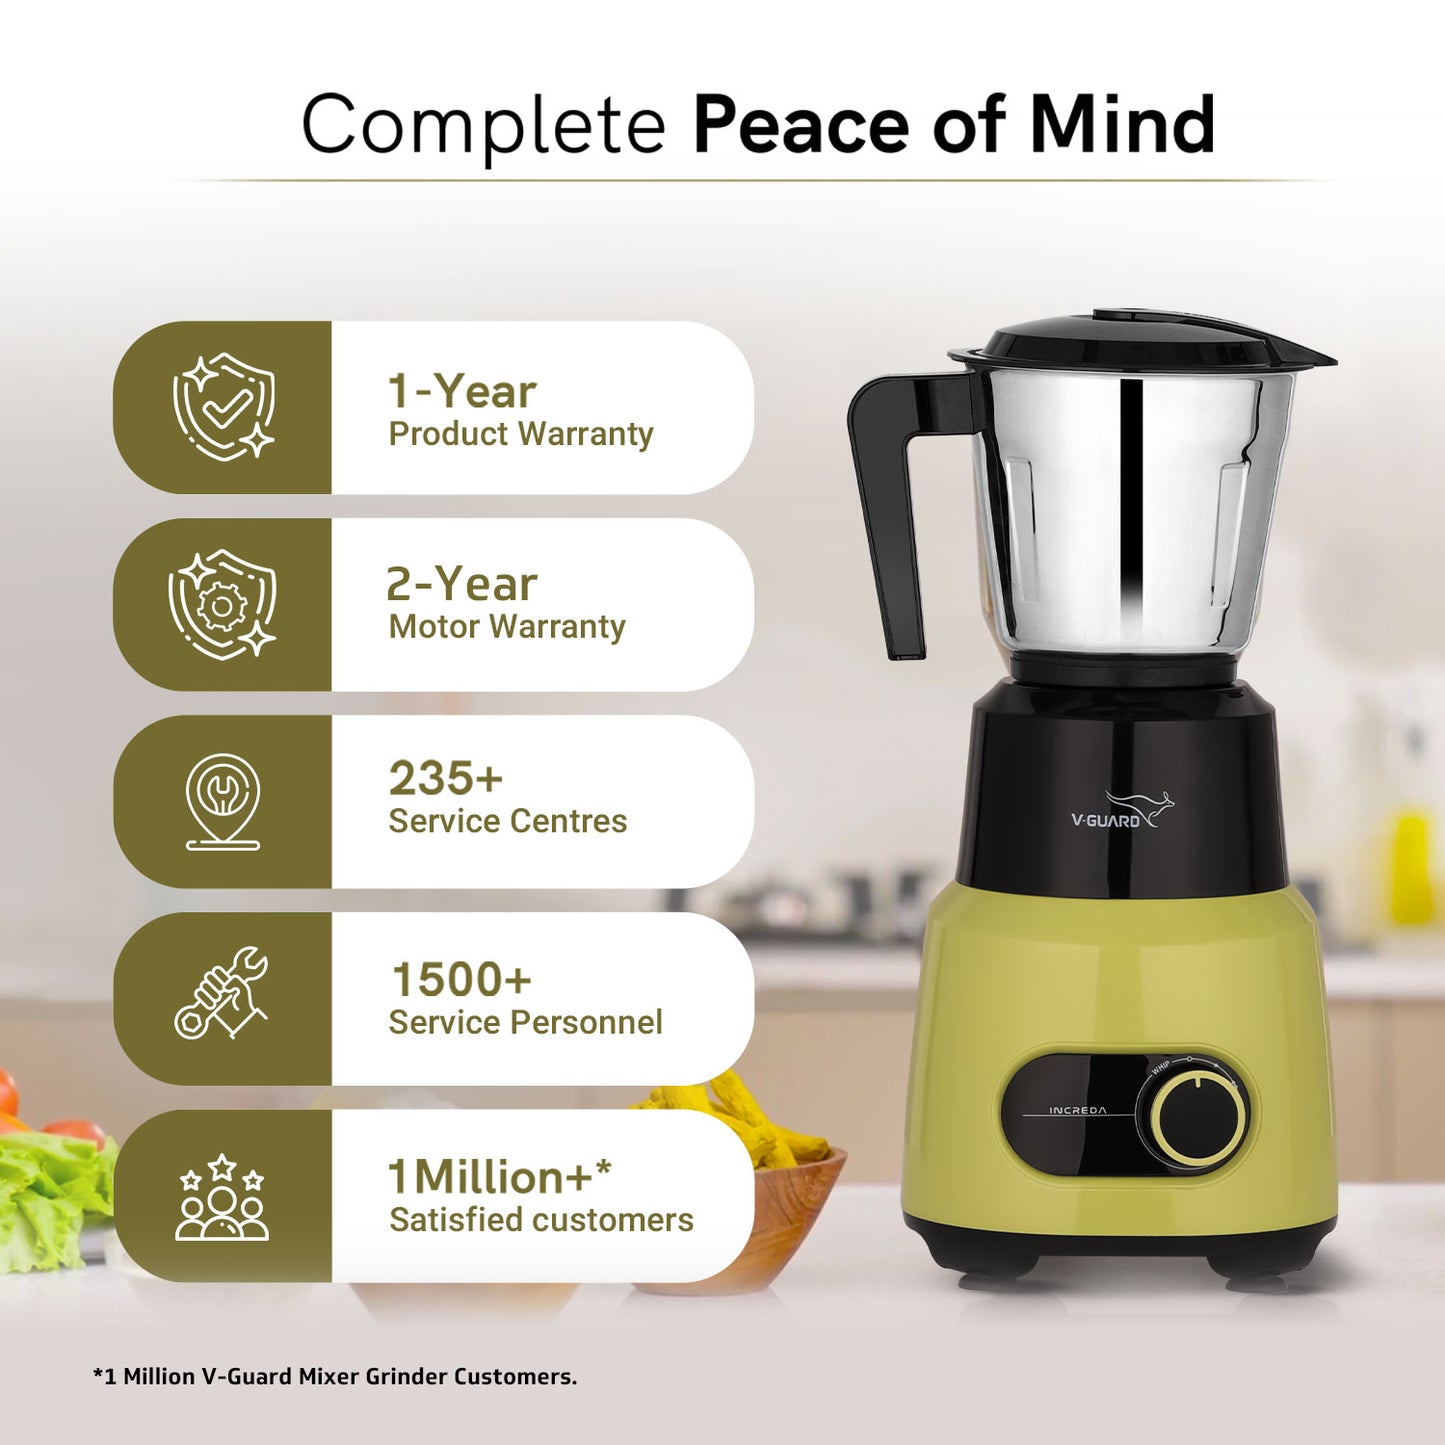 Increda Mixer Grinder 500 Watt/Newly Launched/Mixie for kitchen with Multifunctional SS Mixer Jars (Chutney, Dry, & Wet Jar), Precision Stainless Steel Blades / 2 Year Motor Warranty